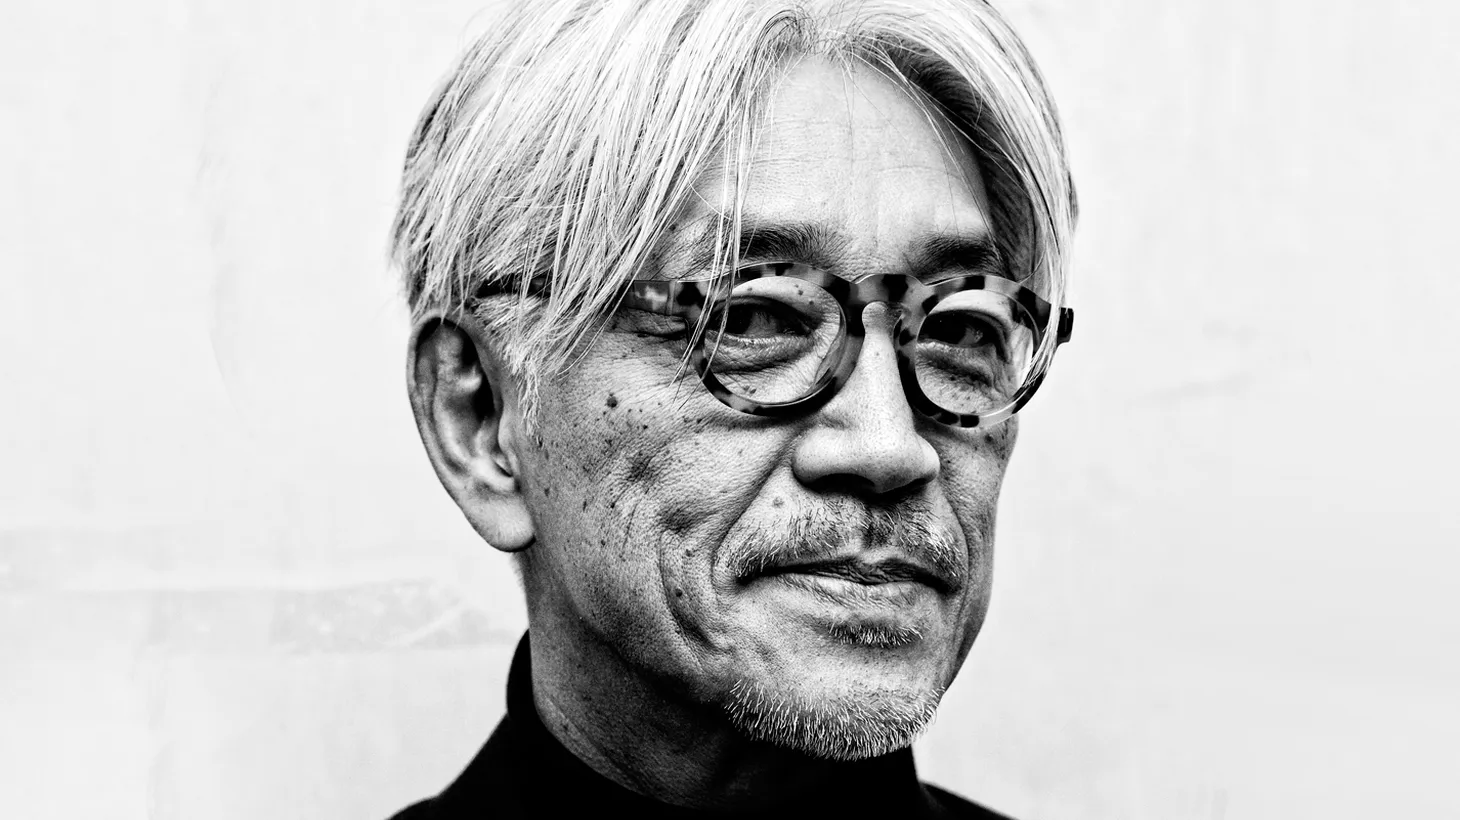 Ryuichi Sakamoto, one of our greatest contemporary composers, most recently for Alejandro Iñárittu on the award winning film The Revenant, sits down with KCRW's Chris Douridas. (10am)